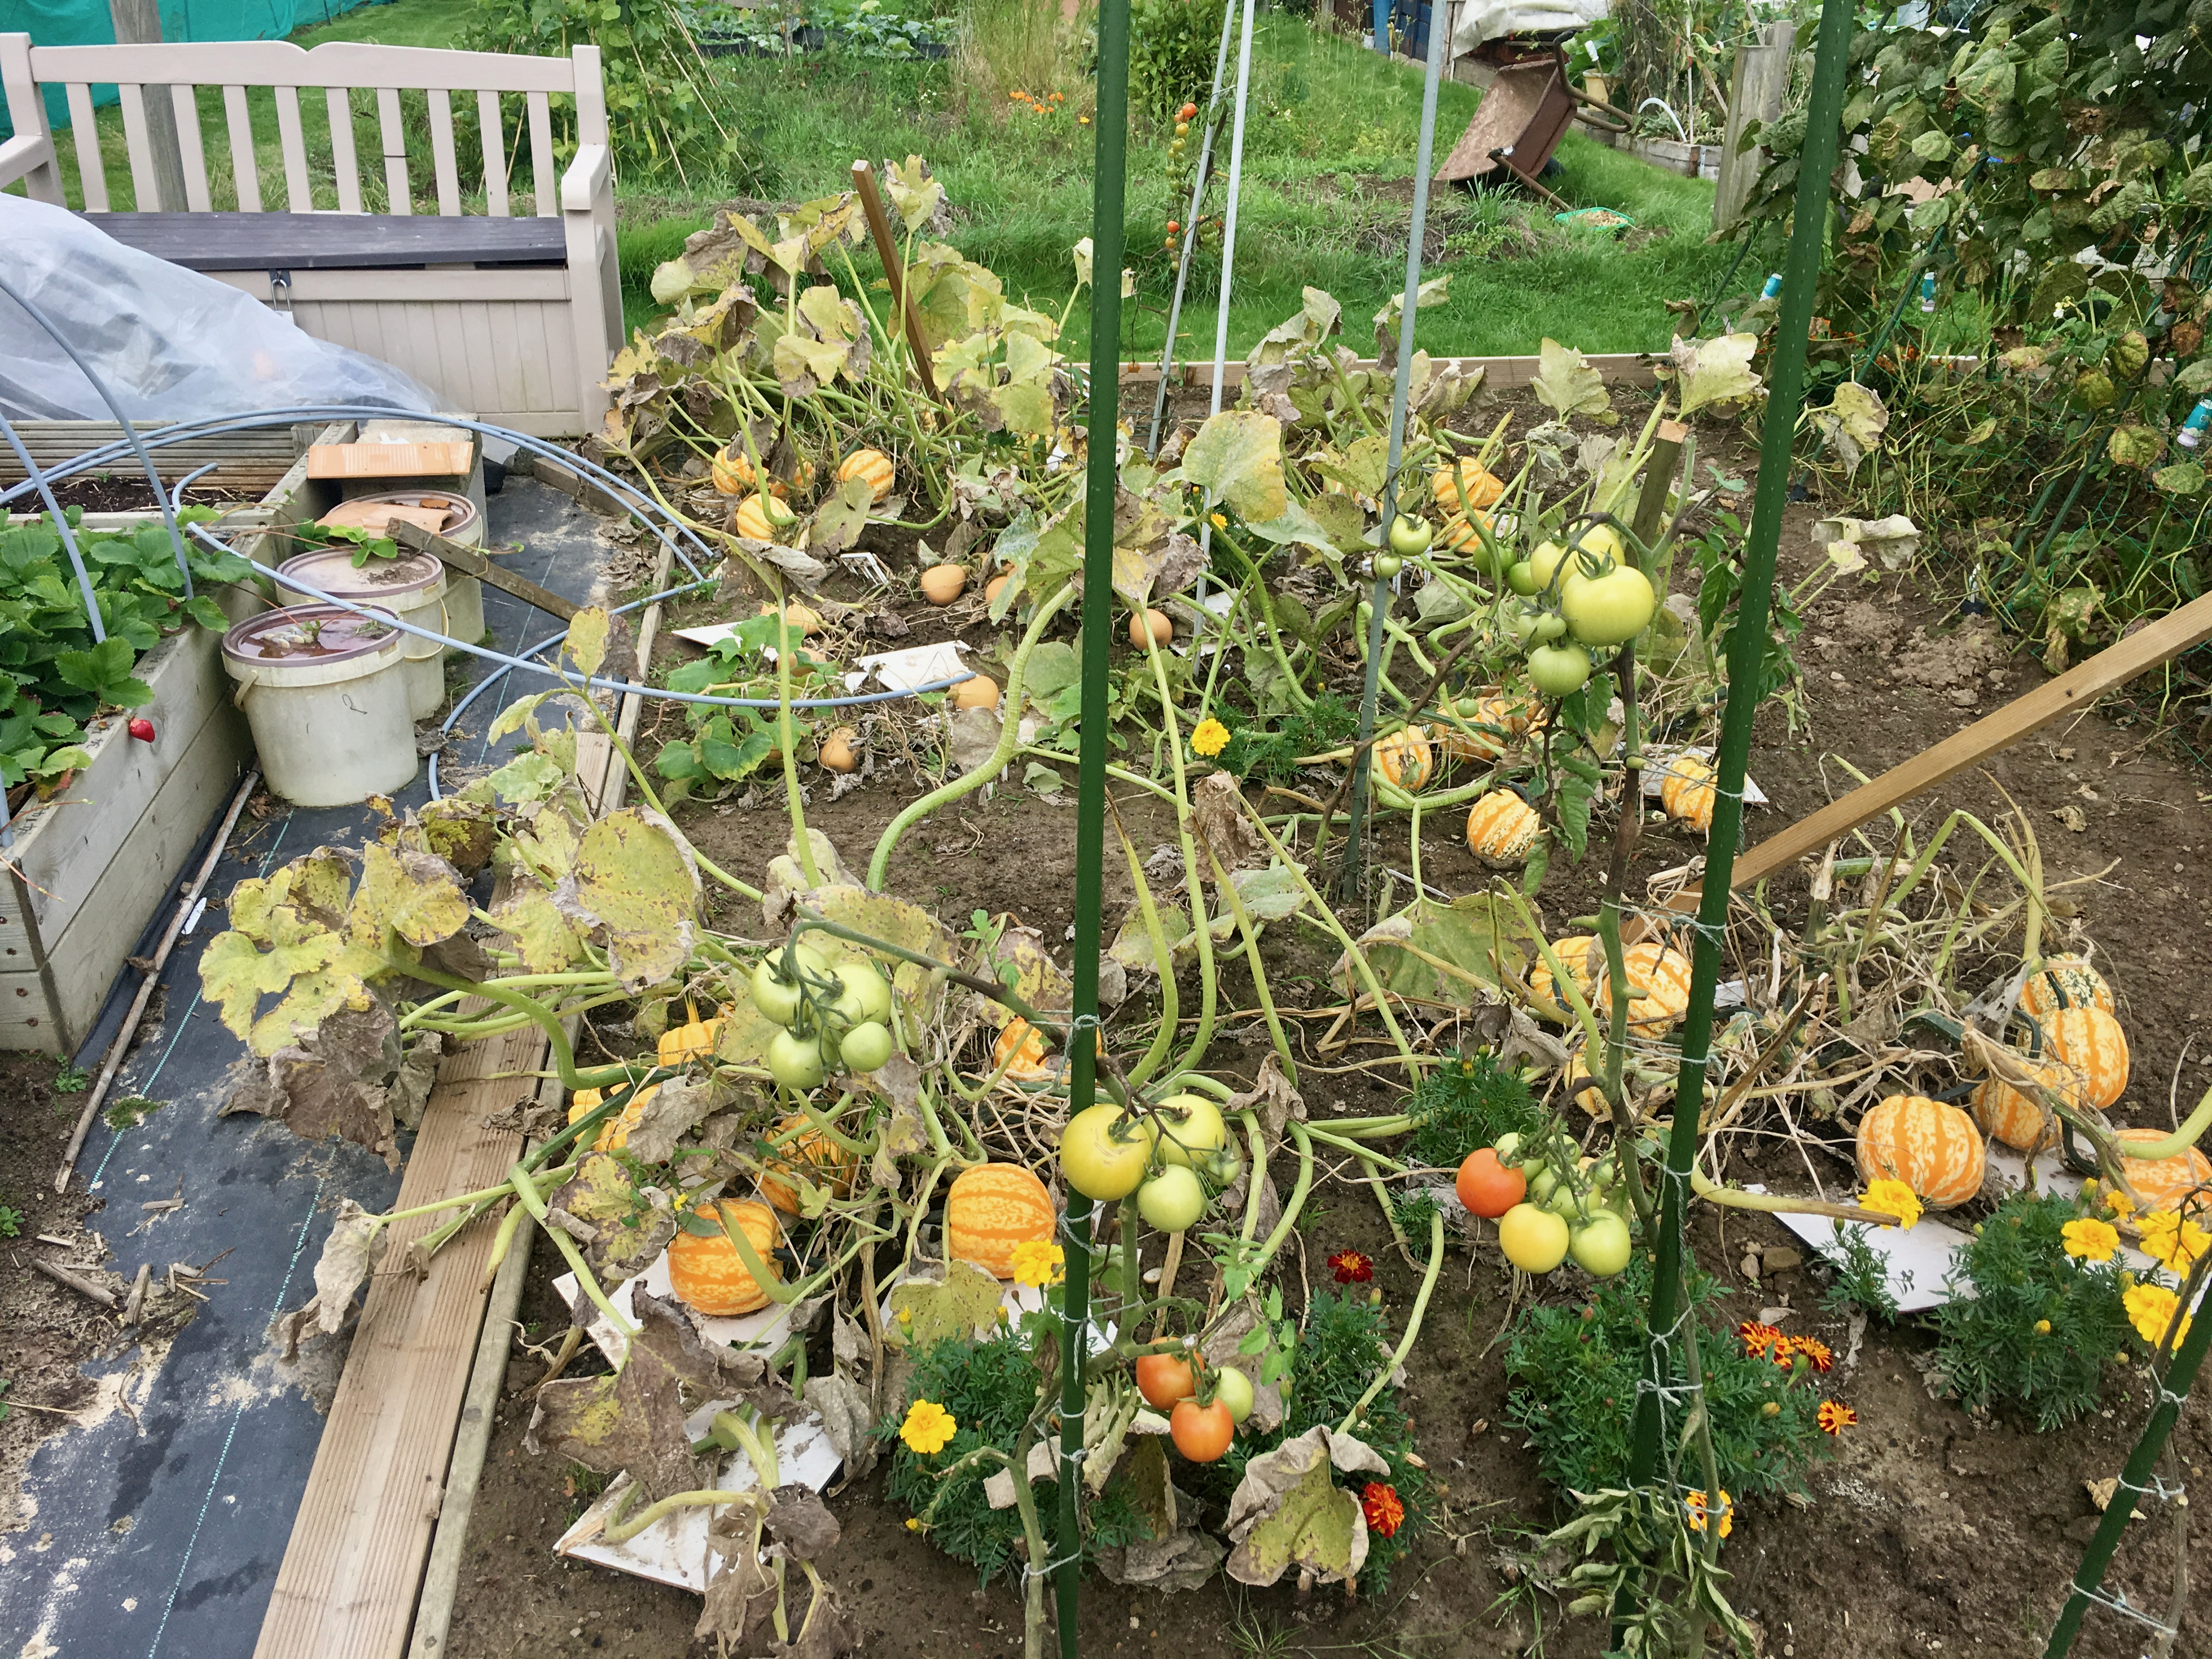 My mums slightly overgrown allotment. In the middle her collection of pumpkins wich are yellow and turning orange. There's also some green and yellow tomatoes on the right. On the left is some black matting, buckets and a box of strawberry plants